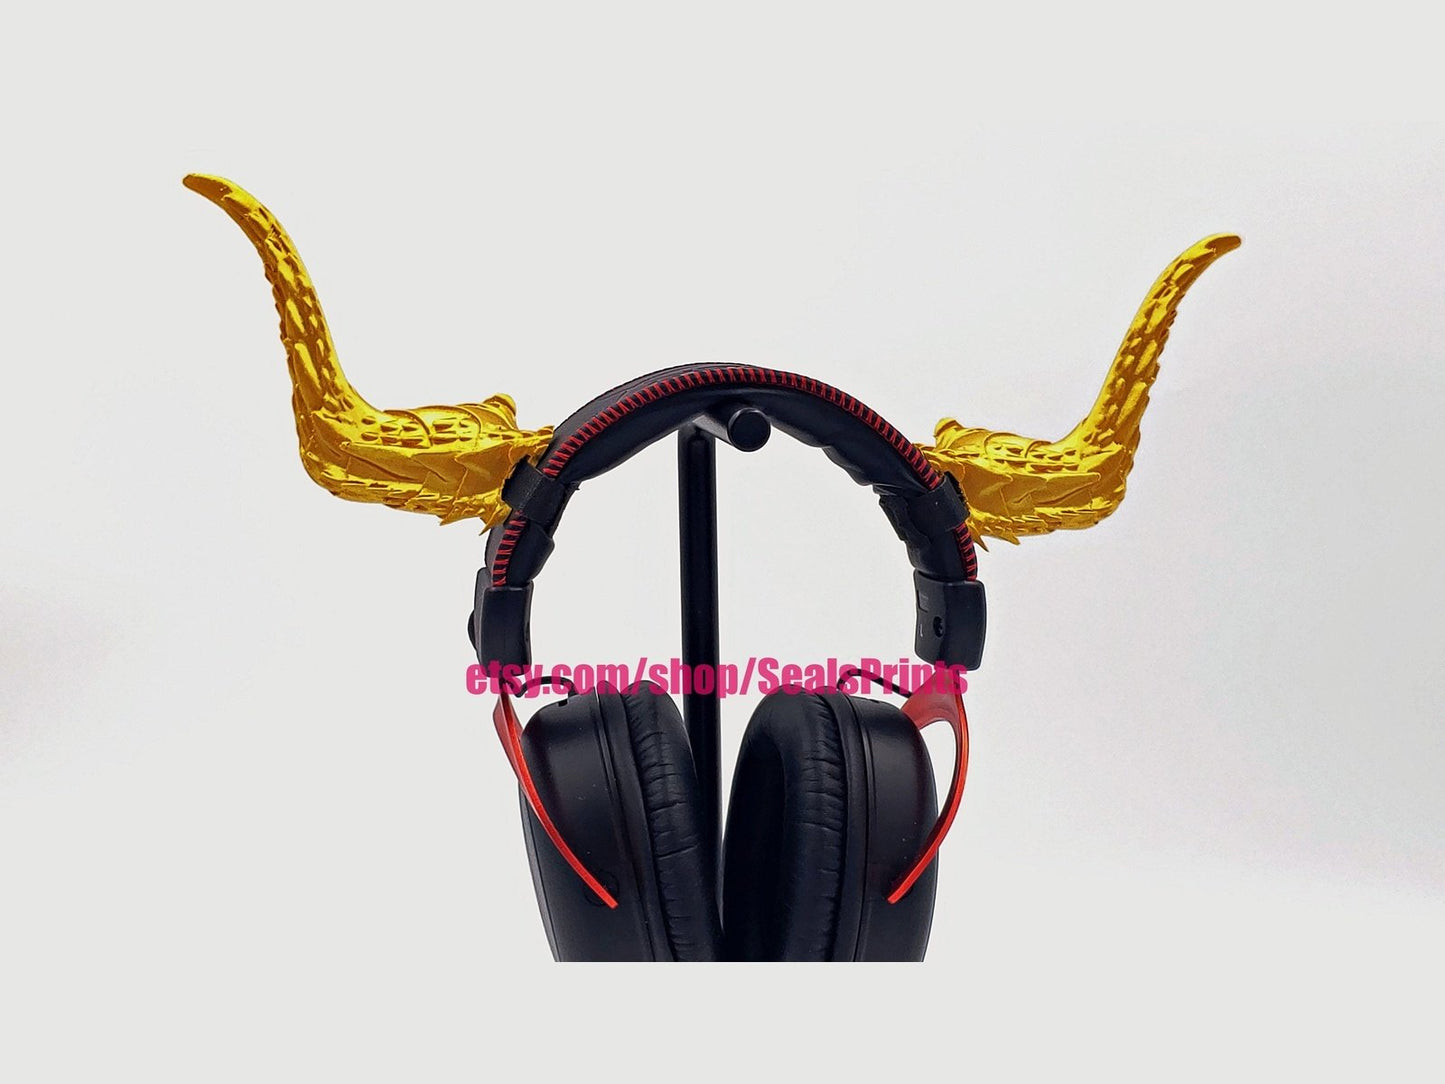 Minotaur Horns Attachment for Headset, Gaming and Streaming Headset Accessories, cosplay, gaming streamer gift, goat horns, bull ram horns